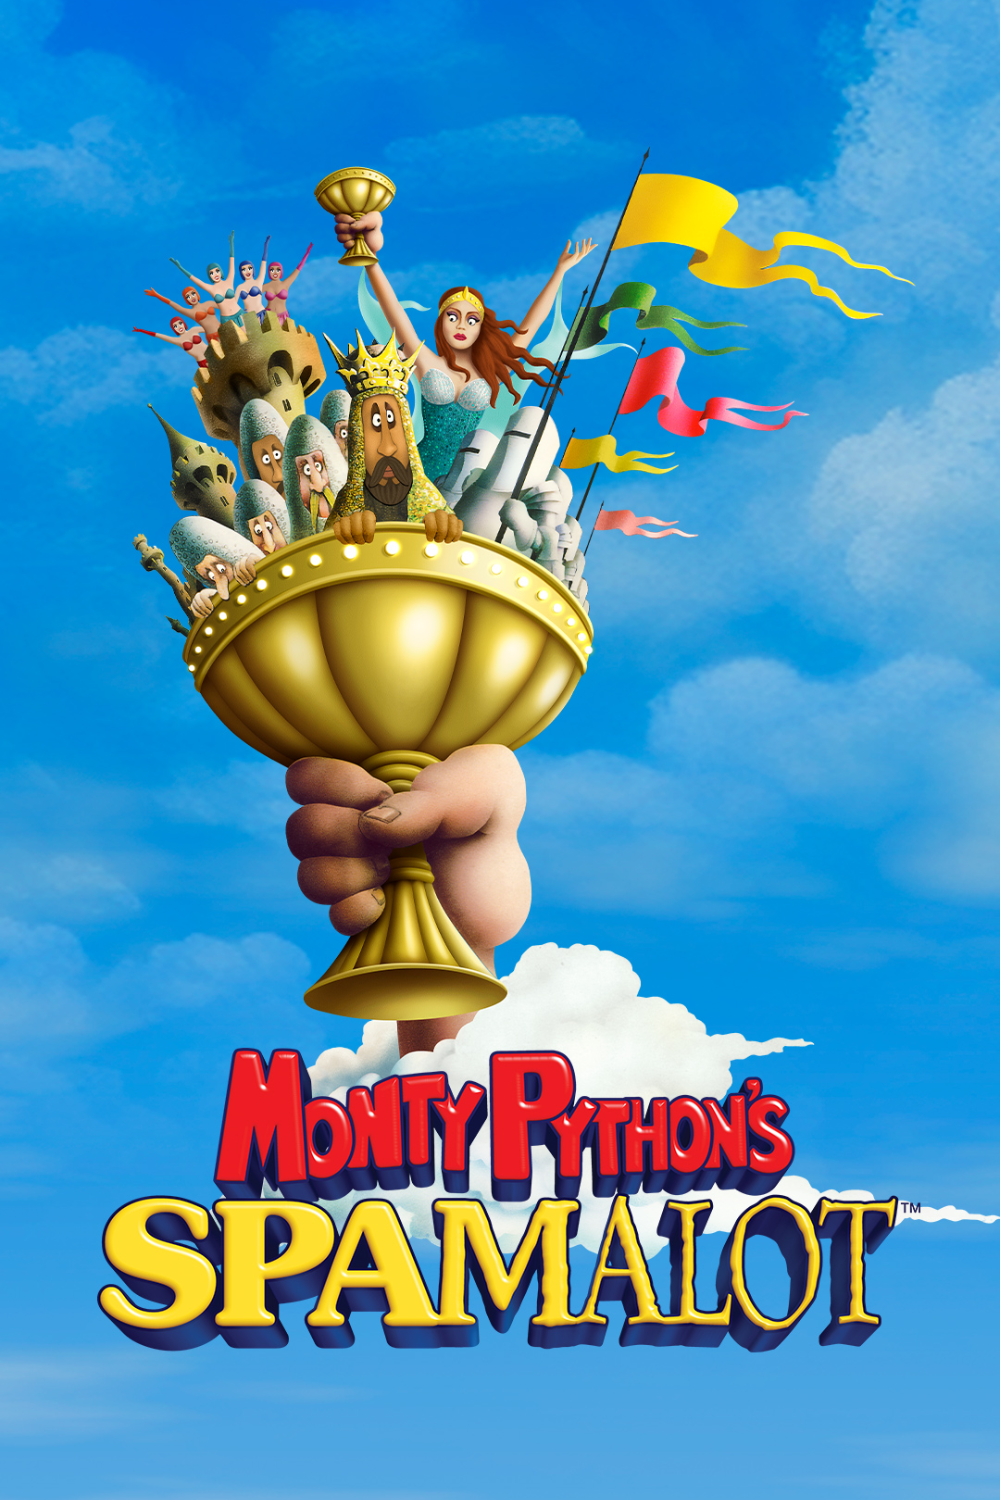 Poster for Spamalot, the Broadway Musical